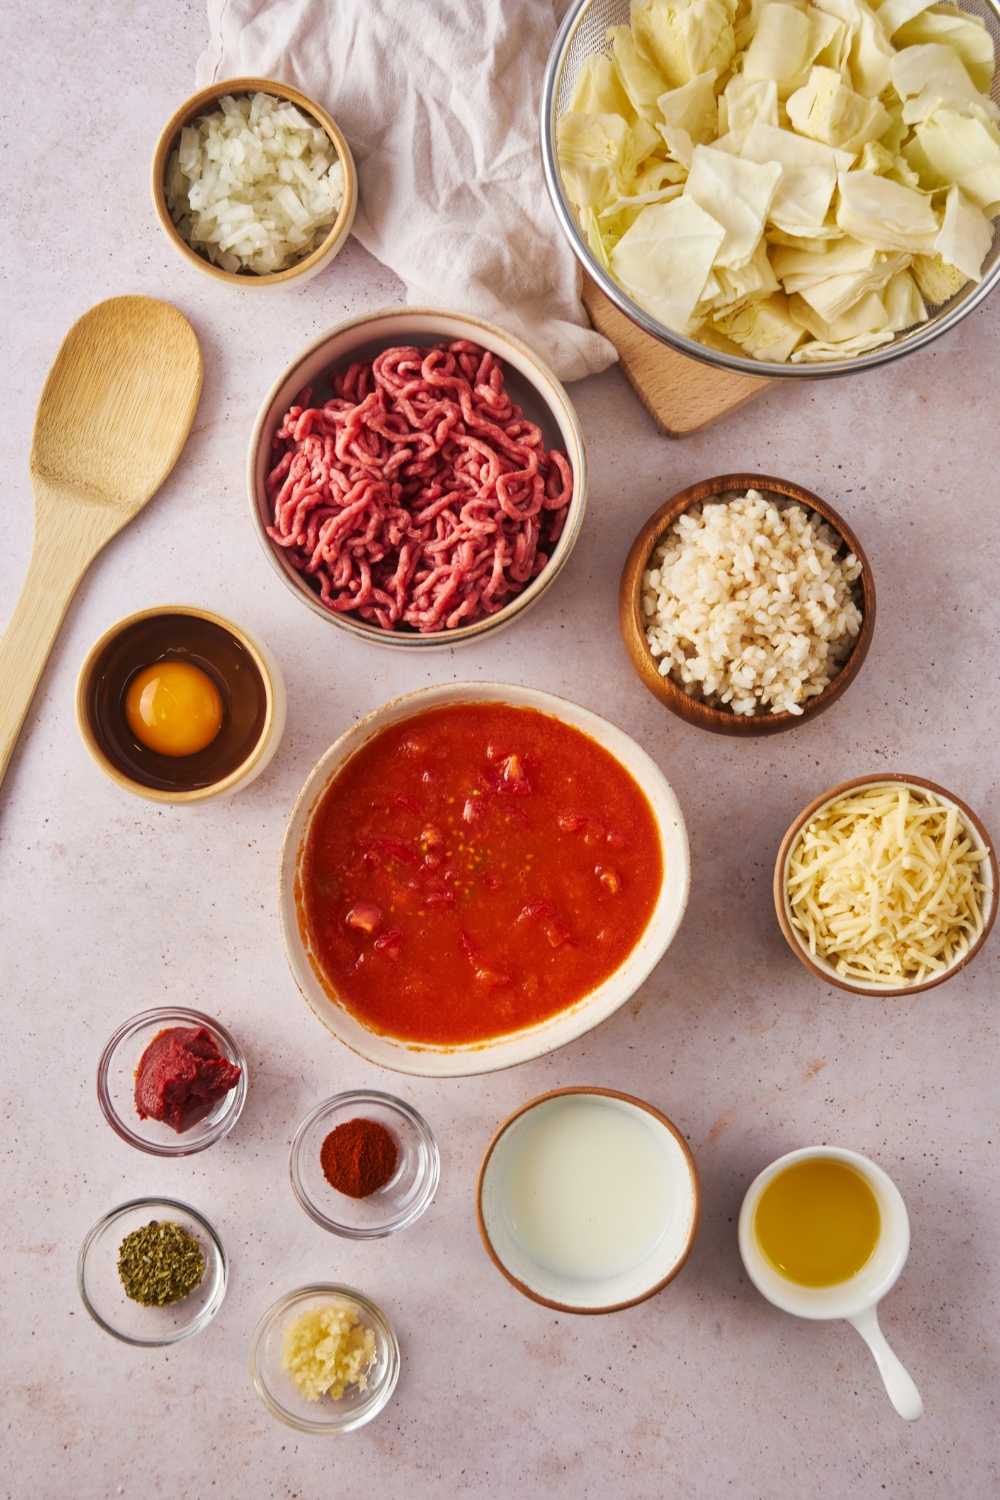 An assortment of ingredients including bowls of raw beef, sliced cabbage, tomato sauce, shredded cheese, milk, and spices.